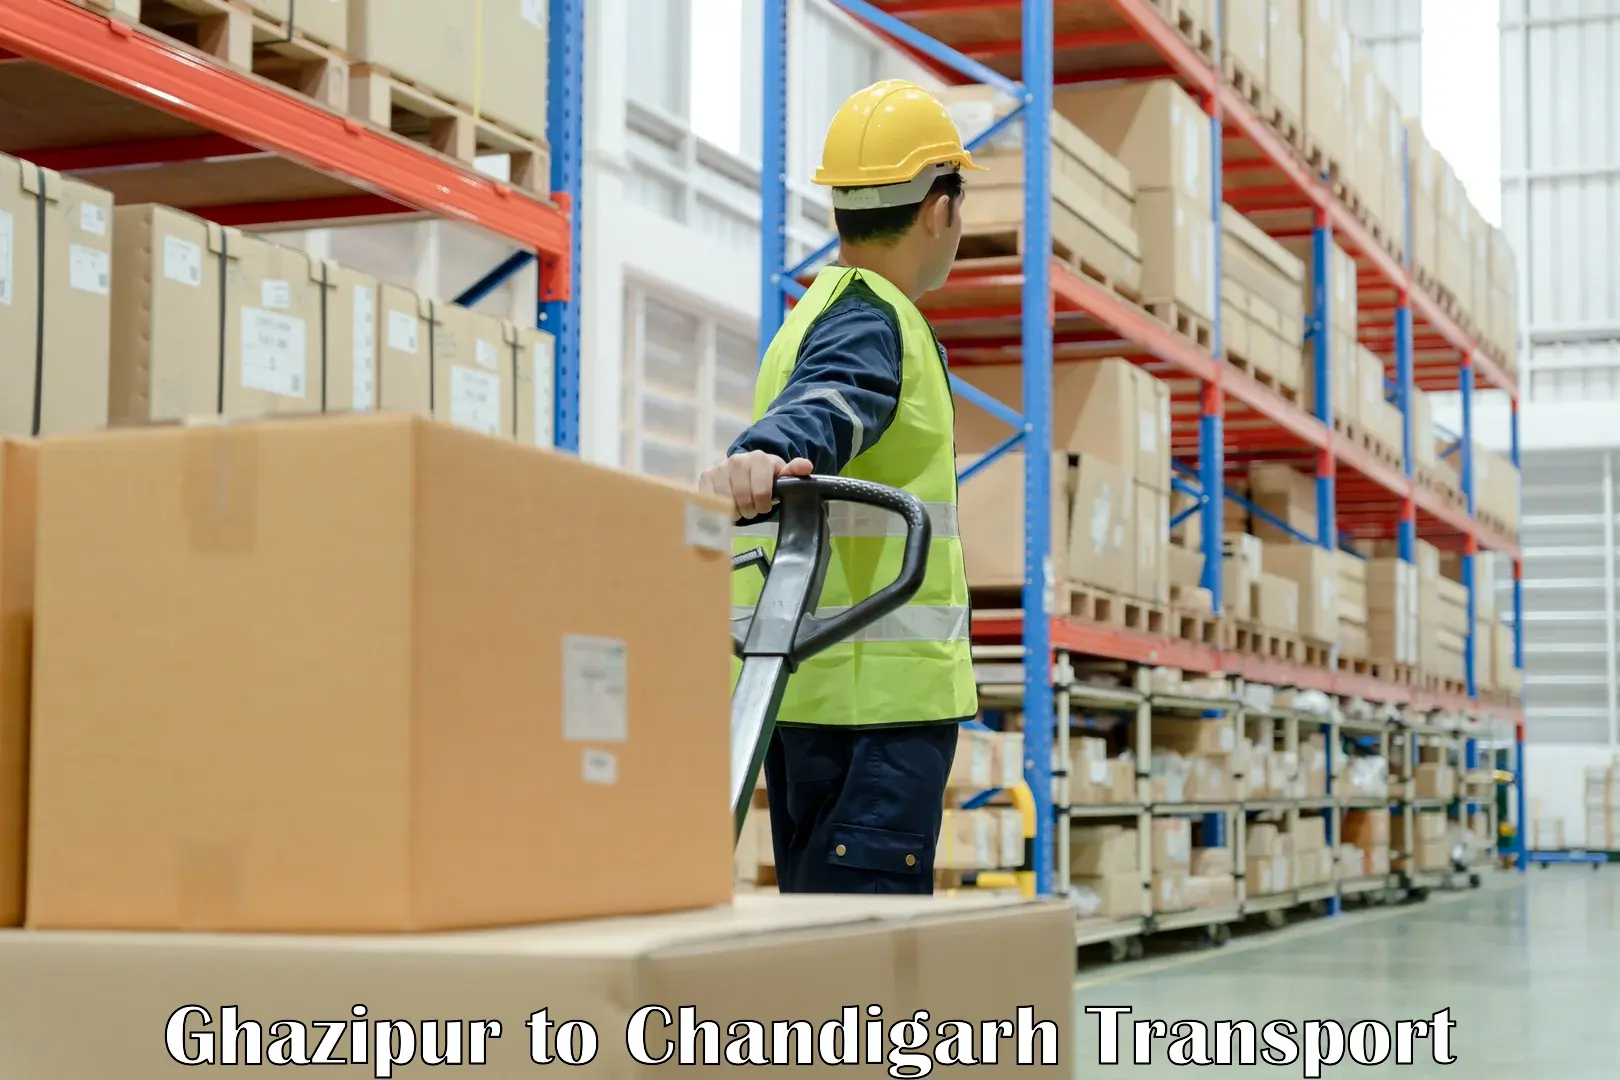 Parcel transport services Ghazipur to Chandigarh